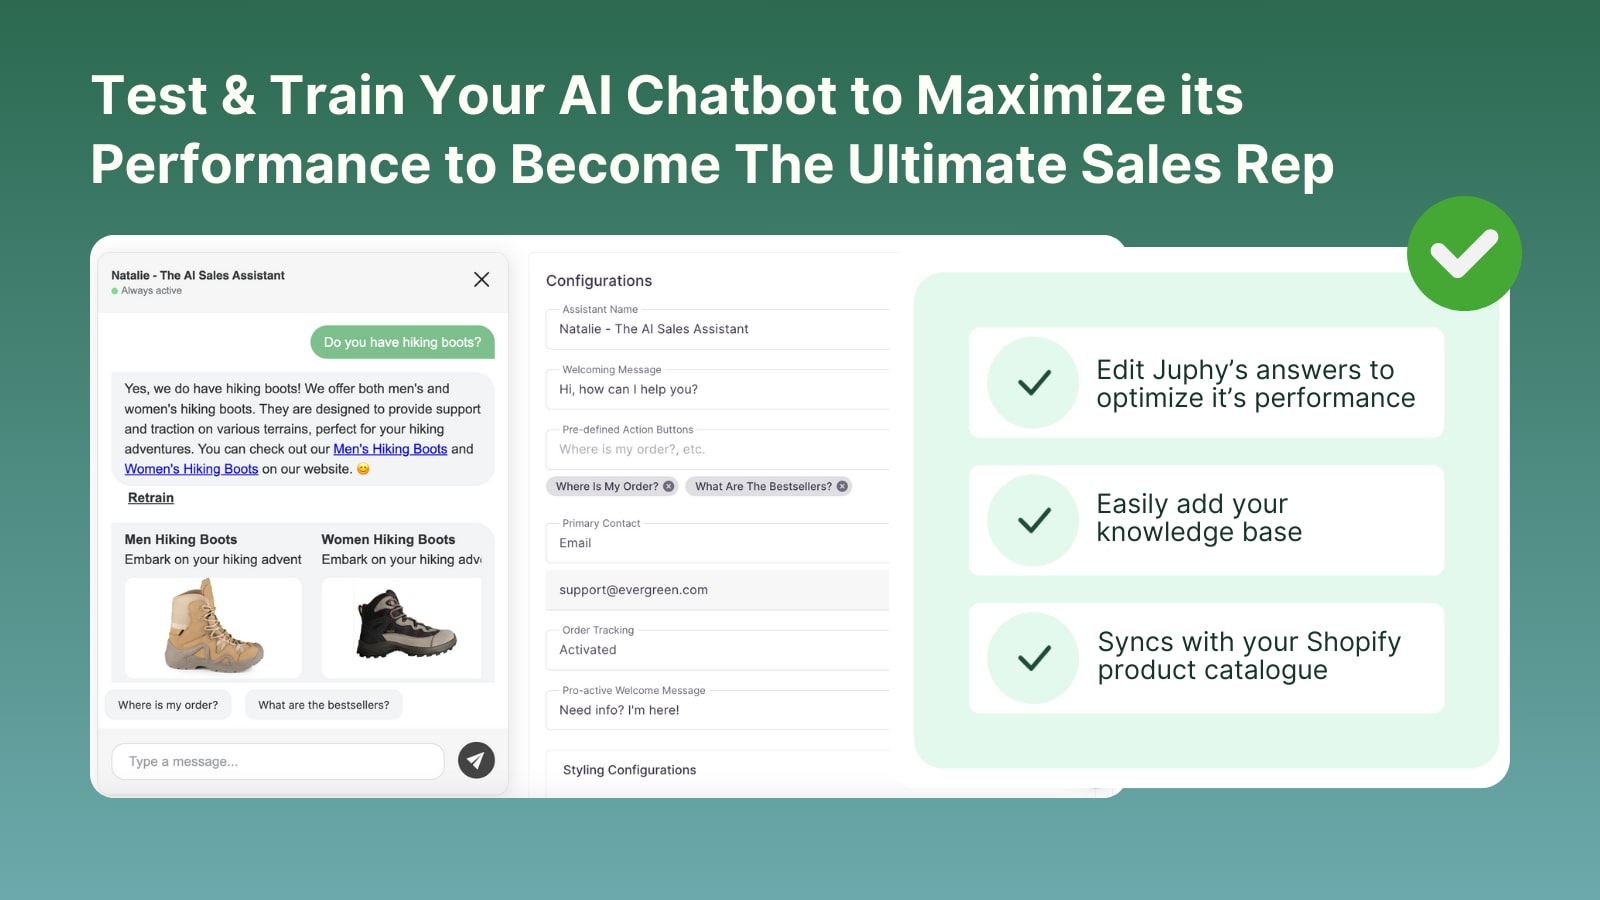 With Juphy AI, you can retrain your chatbot in seconds, achieving up to 99% accuracy.